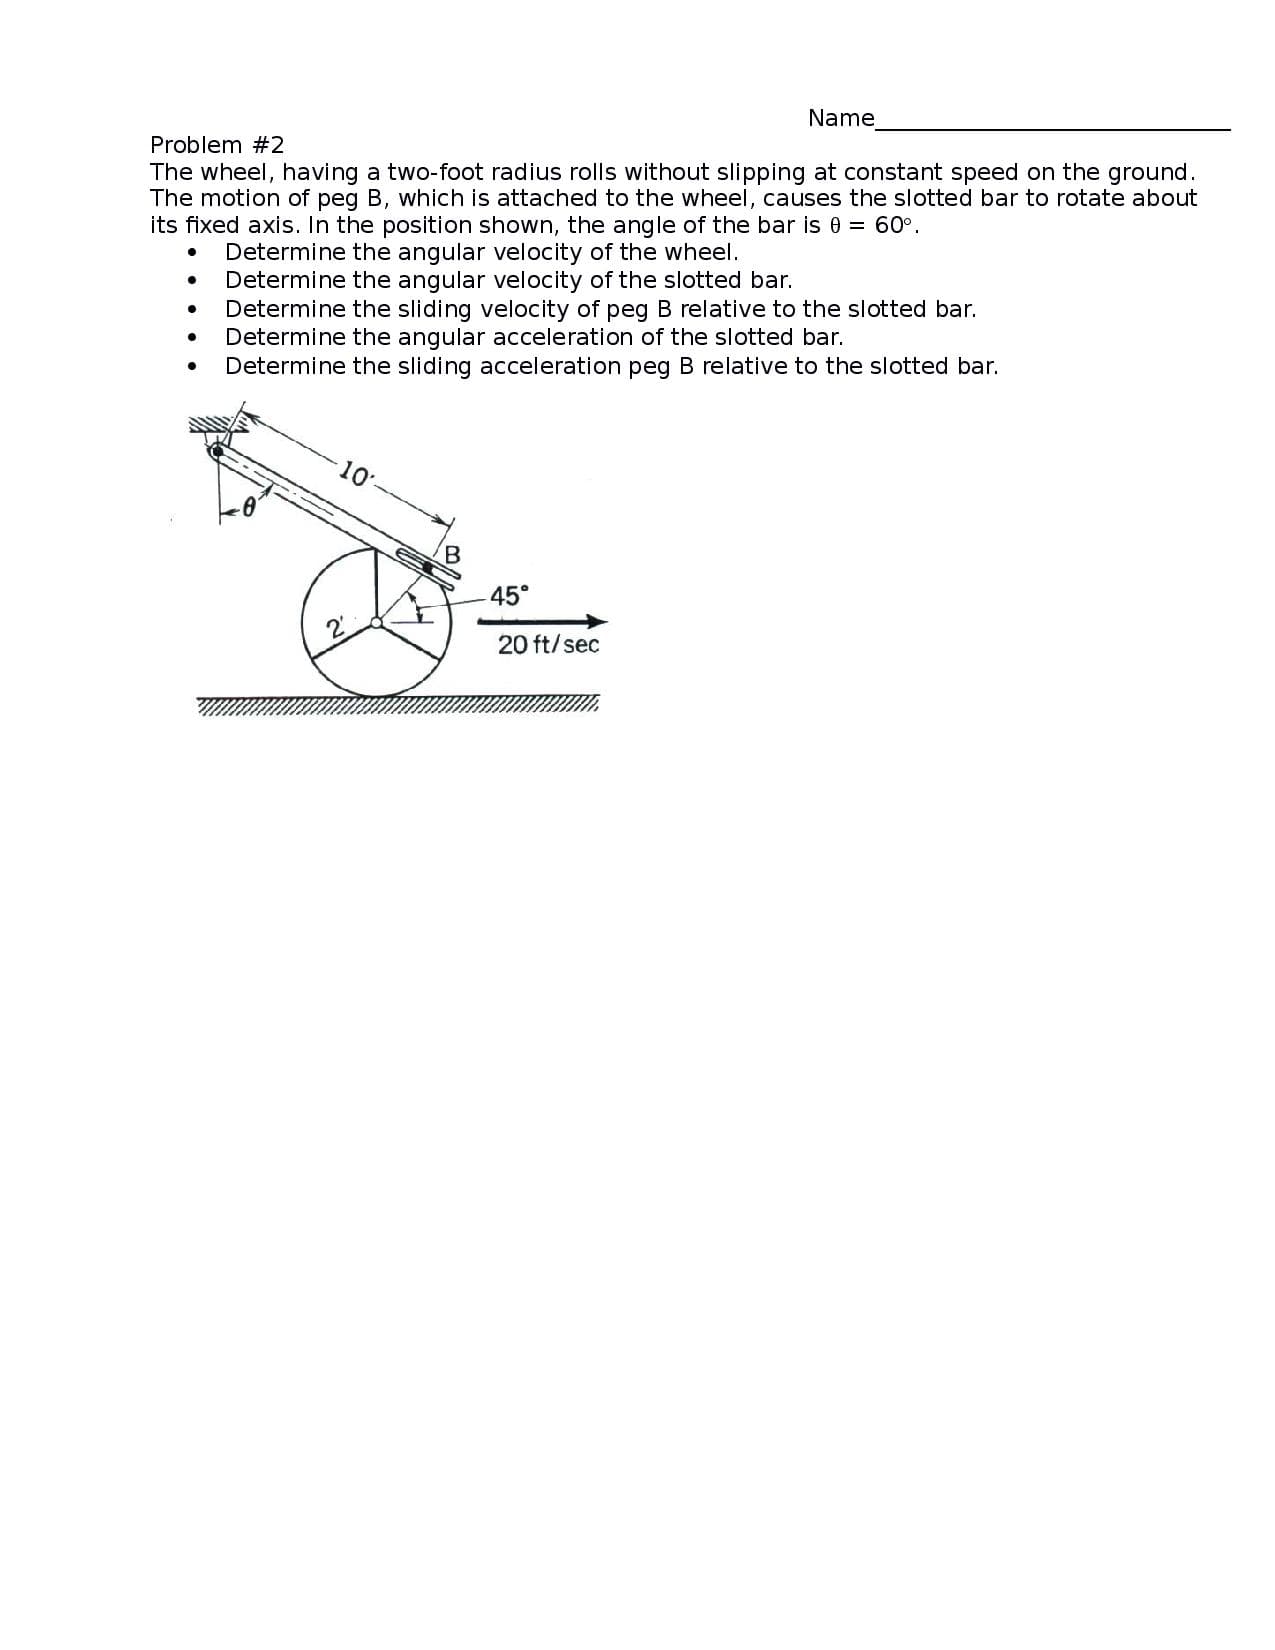 Name
The wheel, having a two-foot radius rolls without slipping at constant speed on the ground.
The motion of peg B, which is attached to the wheel, causes the slotted bar to rotate about
its fixed axis. In the position shown, the angle of the bar is 0 = 60°.
Problem #2
Determine the angular velocity of the wheel.
Determine the angular velocity of the slotted bar.
Determine the sliding velocity of peg B relative to the slotted bar.
Determine the angular acceleration of the slotted bar.
Determine the sliding acceleration peg B relative to the slotted bar.
10
B.
45°
20 ft/sec
